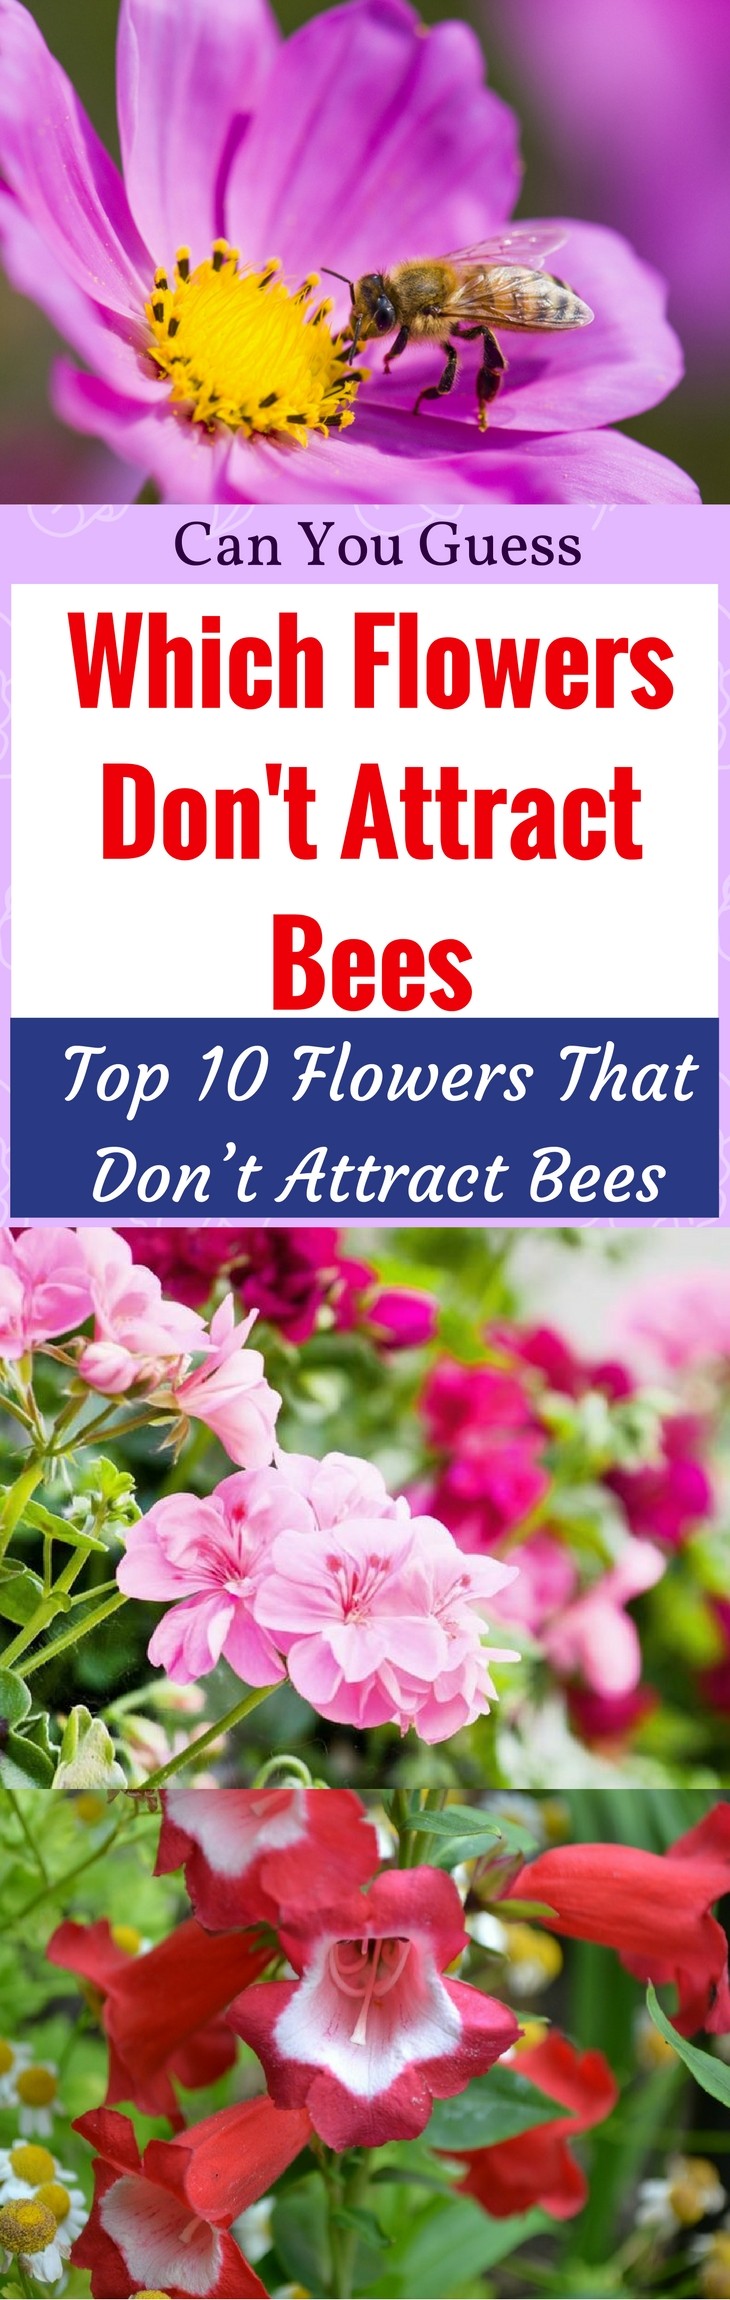 flowers that don't attract bees pin it-1